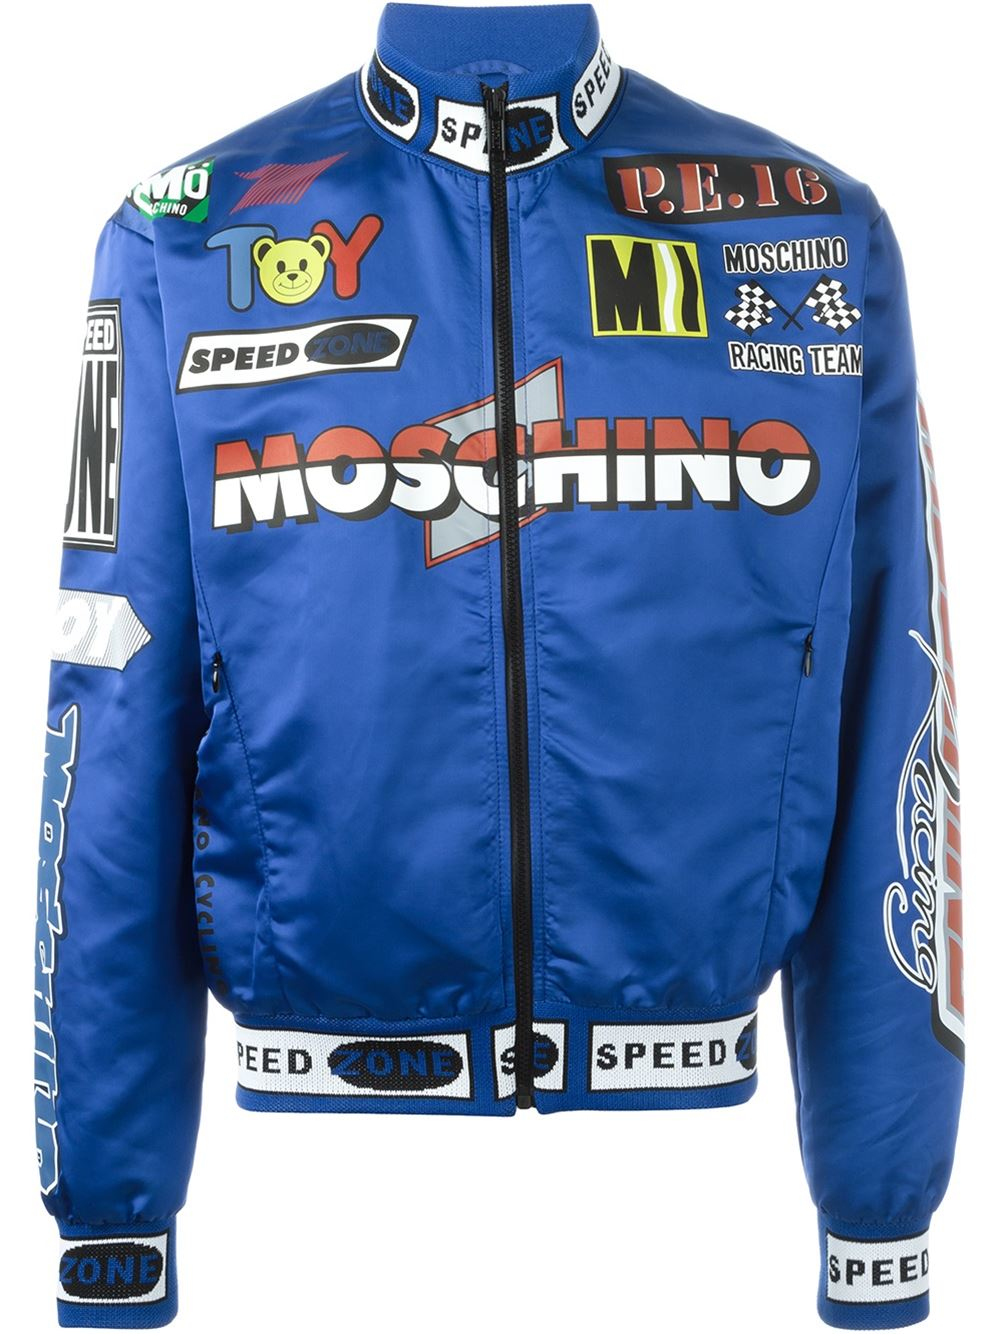 Lyst - Moschino Racing Bomber Jacket in Blue for Men